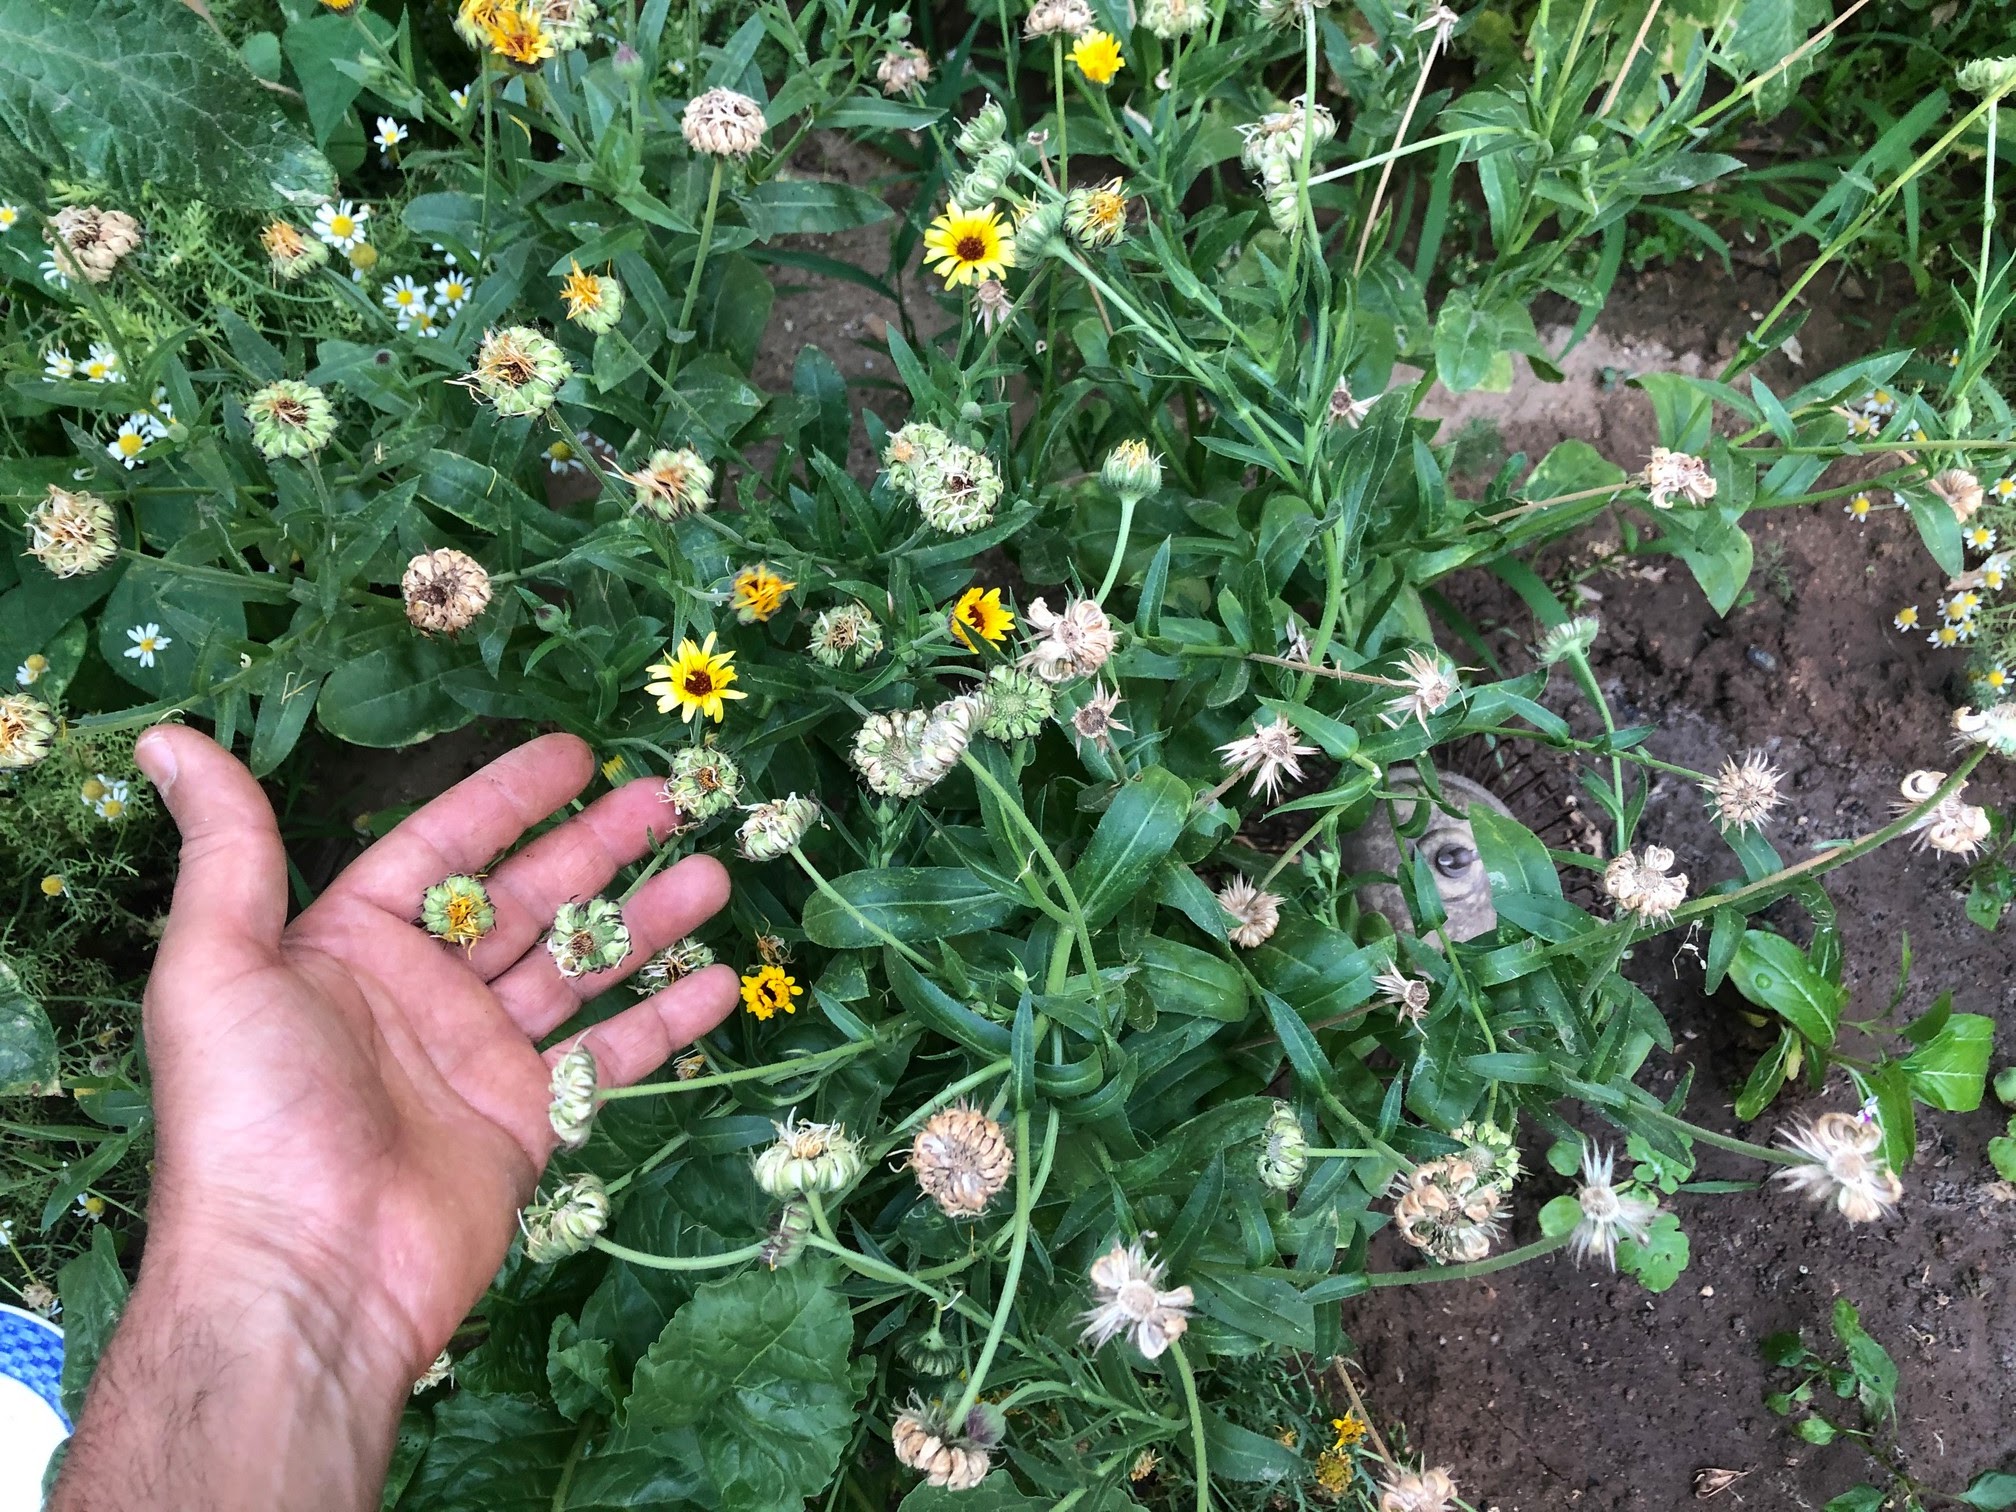 These are the green calendula seeds. Wait and don’t pick the seeds yet. You want to wait to collect your calendula seeds until they are fully brown and dry.